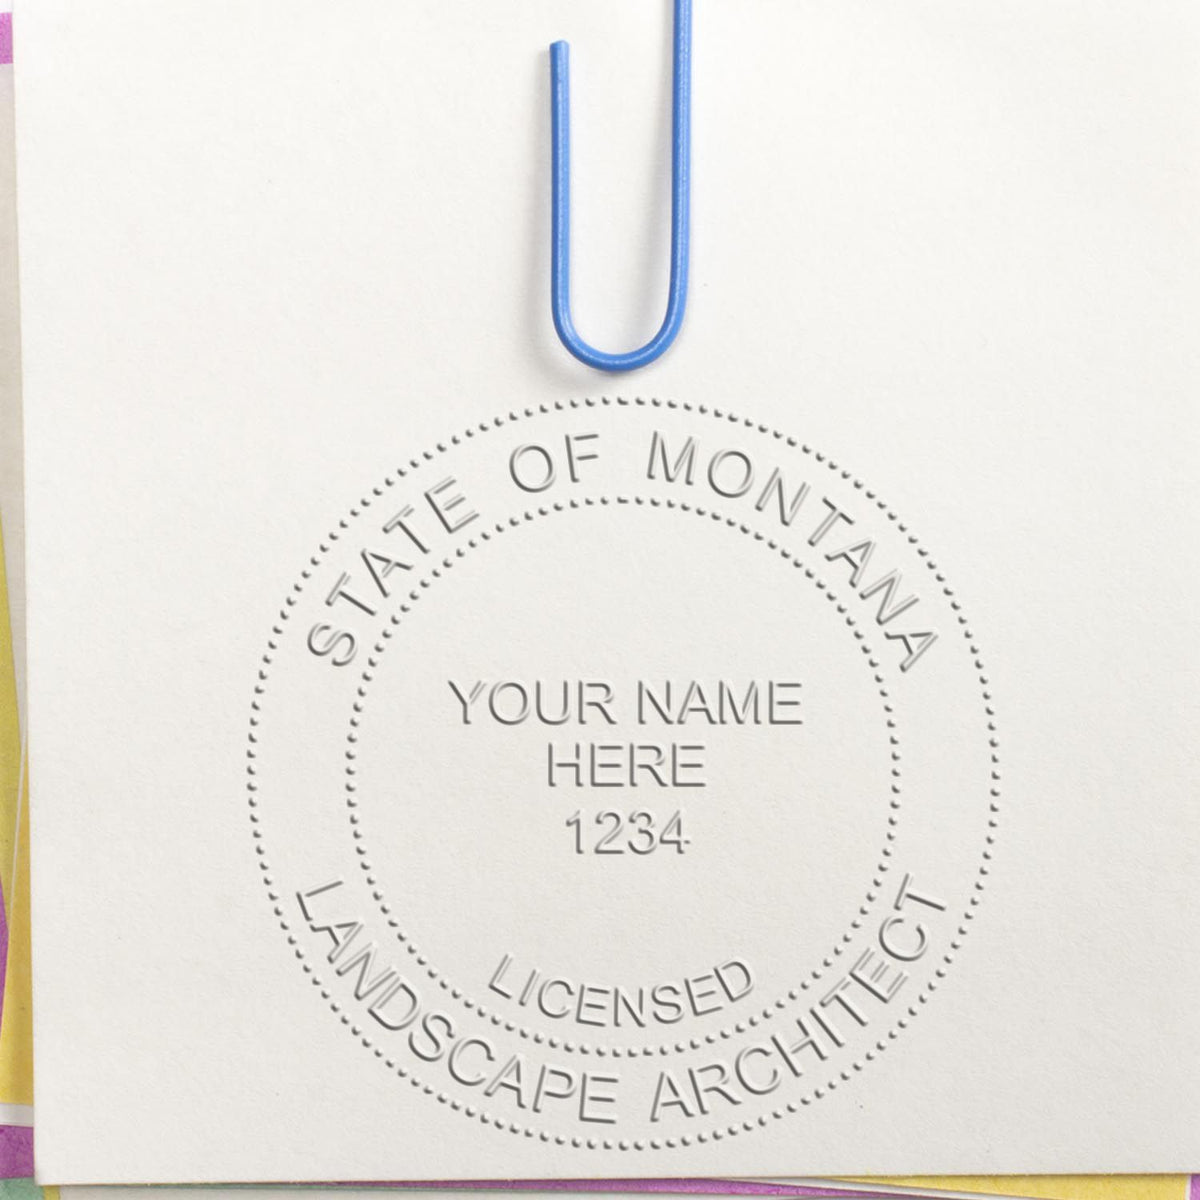 A stamped imprint of the Gift Montana Landscape Architect Seal in this stylish lifestyle photo, setting the tone for a unique and personalized product.